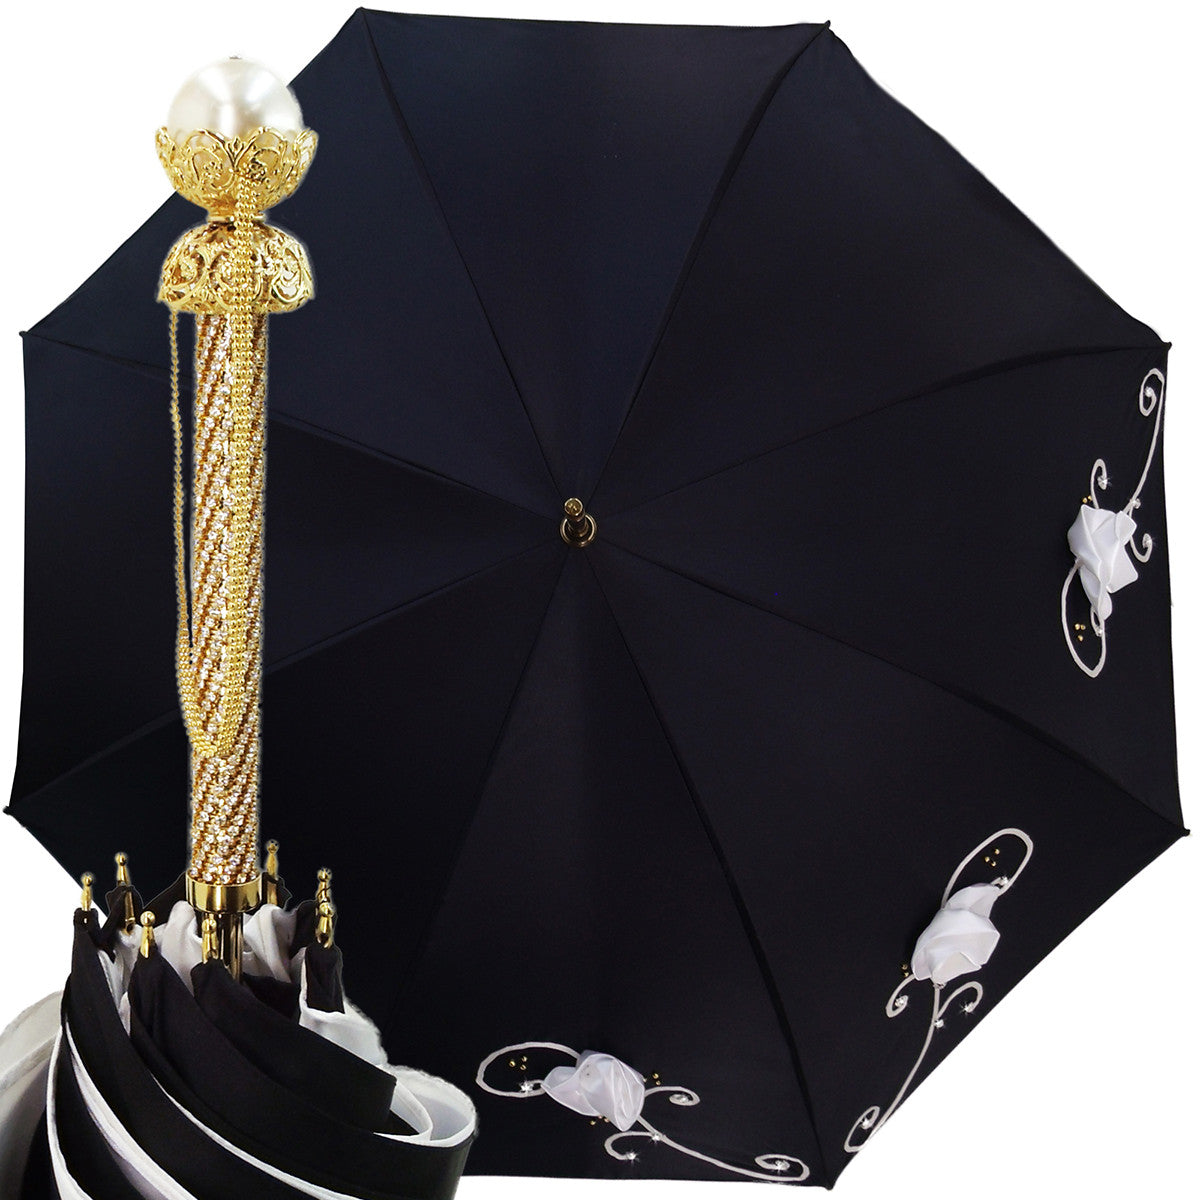 Umbrella With Double Cloth And Embroidered Flowers - il-marchesato